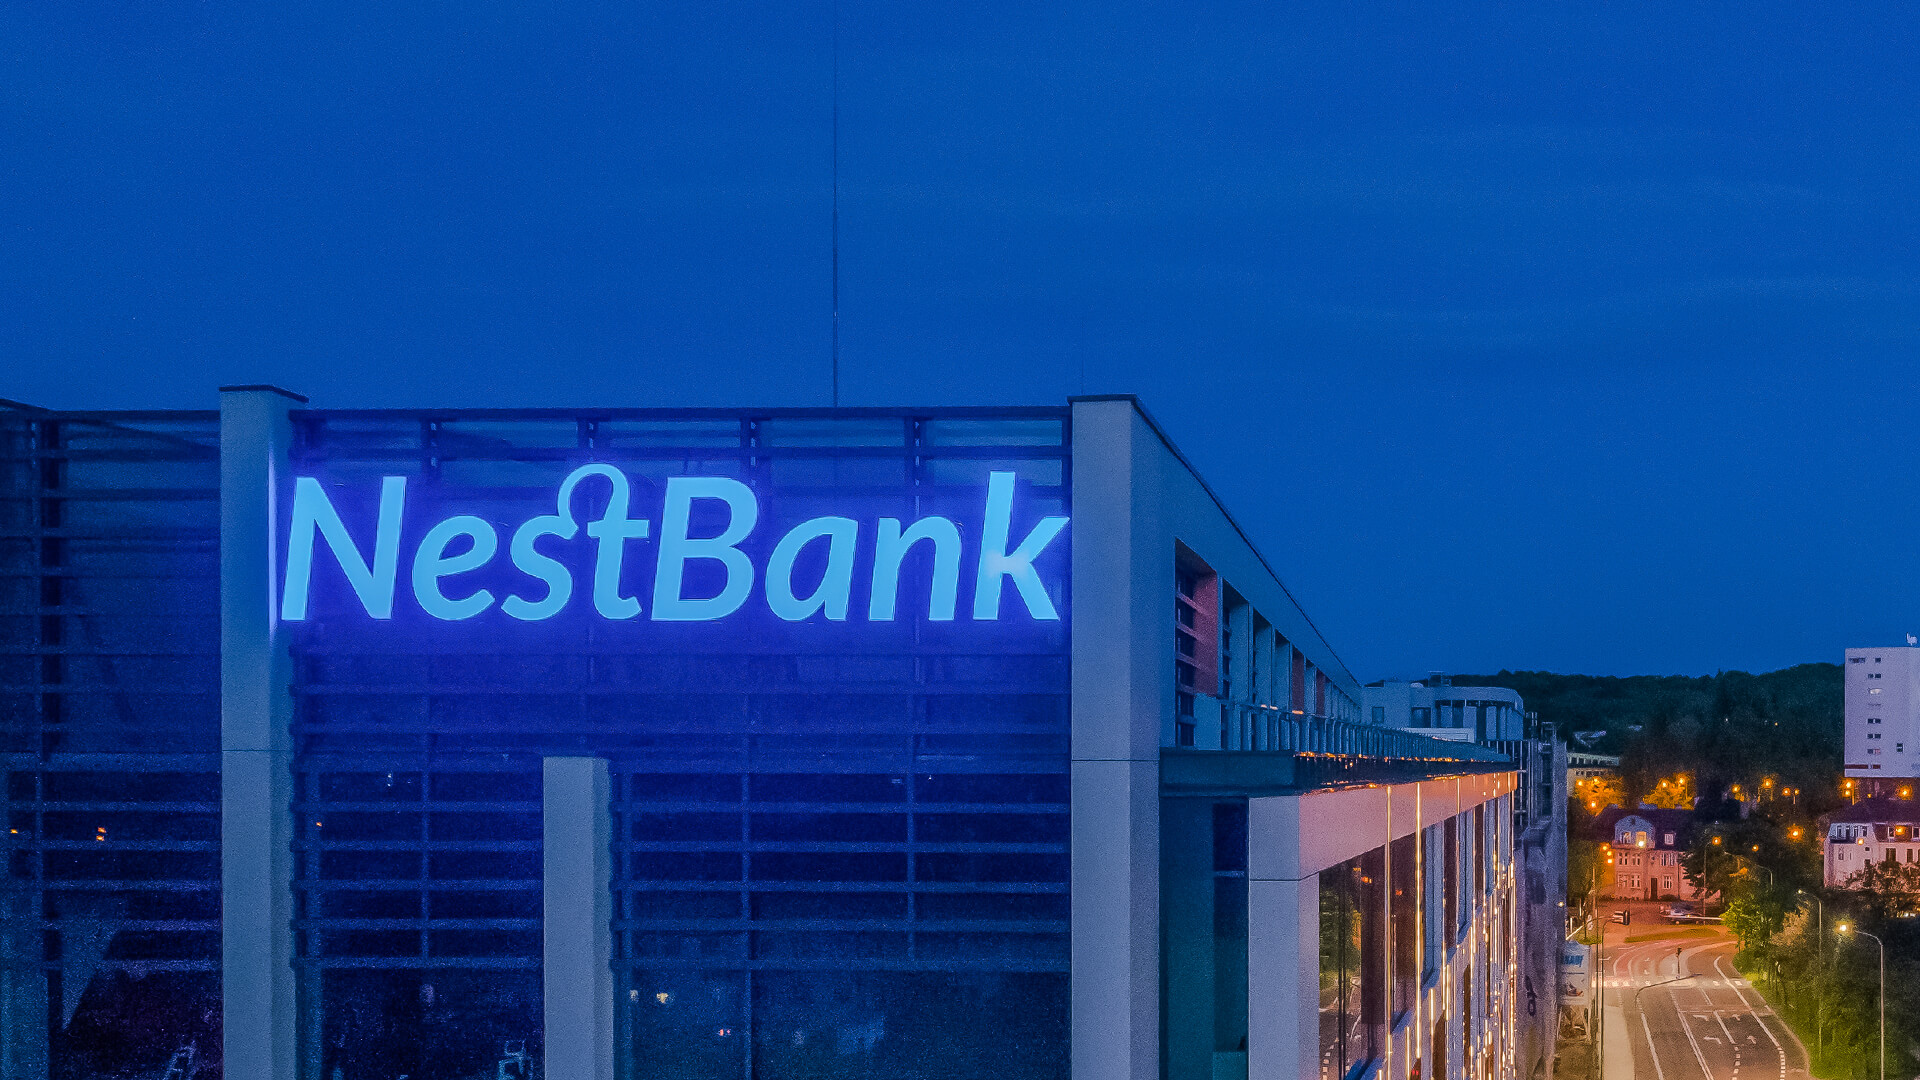 nestbank  - block letters-led-letters-bank-3d-chanel-letters-advertising-nest-bank-letters-3d-on-the-building-letters-nest-bank